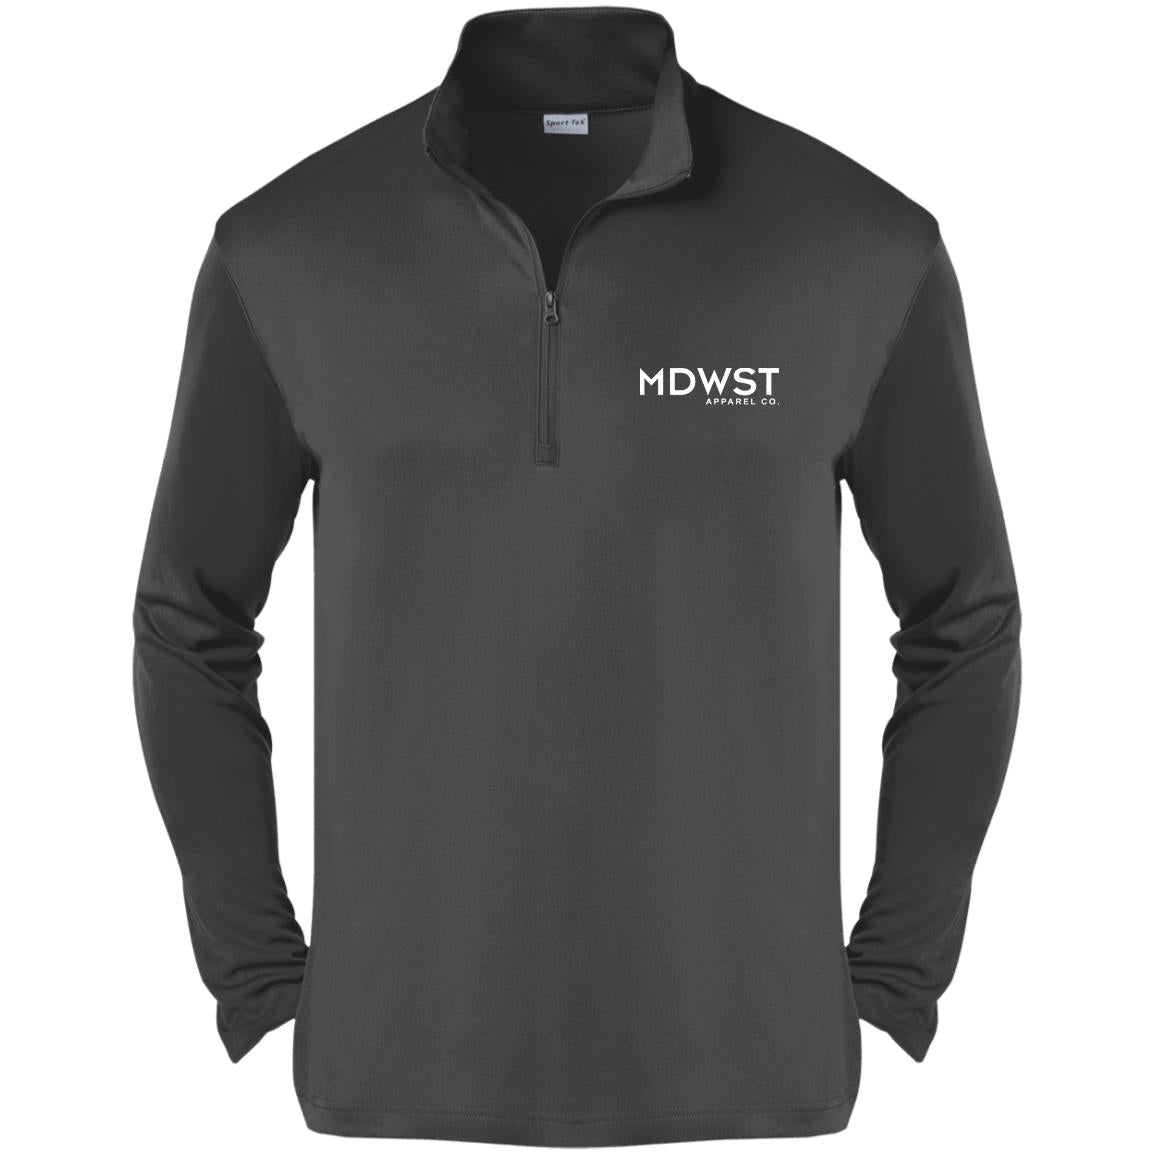 MDWST Light Weight Competitor 1/4-Zip Pullover